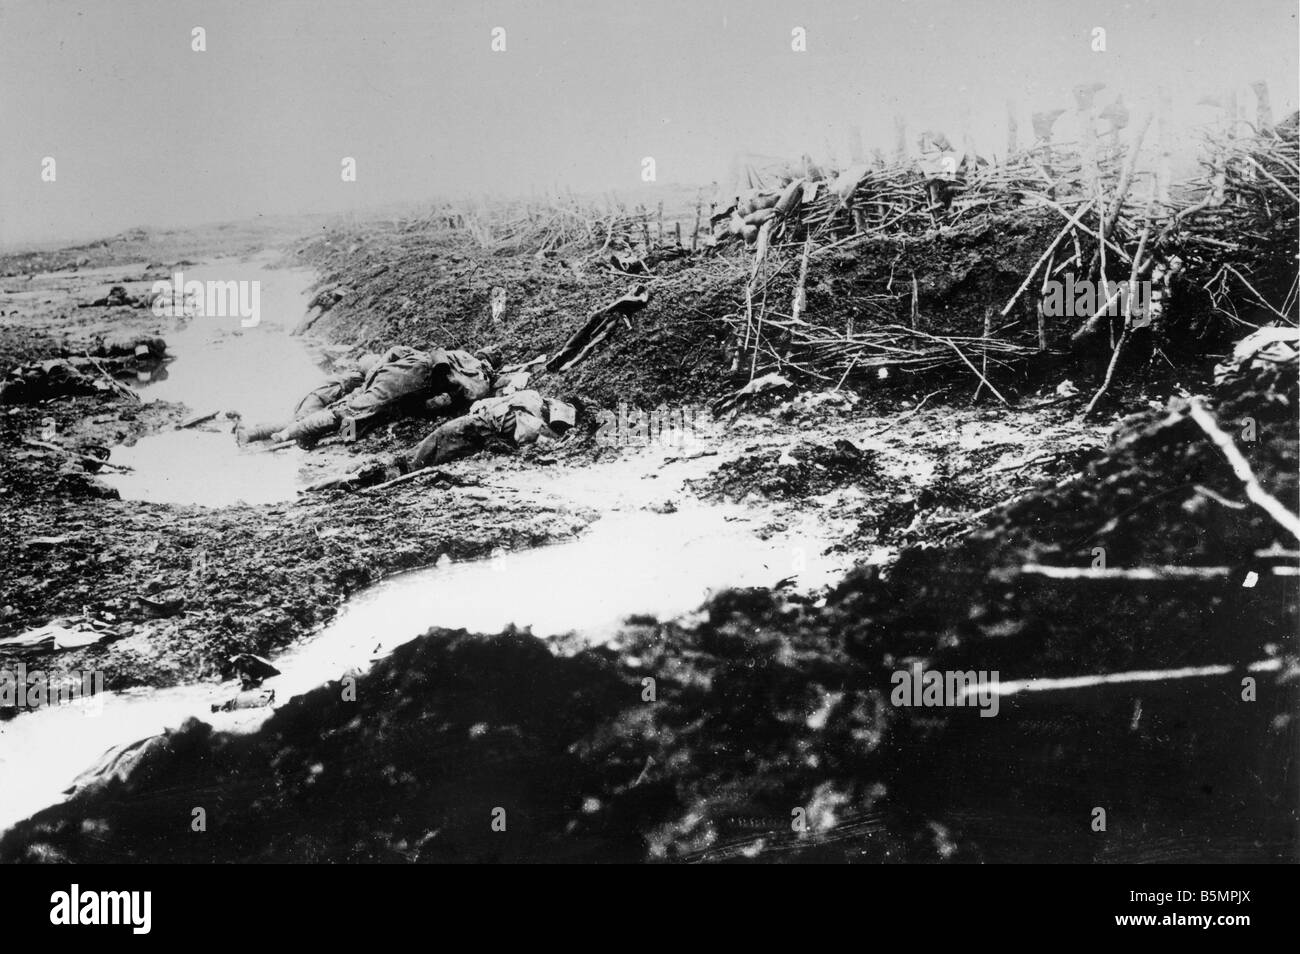 9 1916 3 18 A1 10 E Battle of Postawy 1916 Battlefield World War I Eastern Front Defeat of Russian troops after the offe nsive a Stock Photo